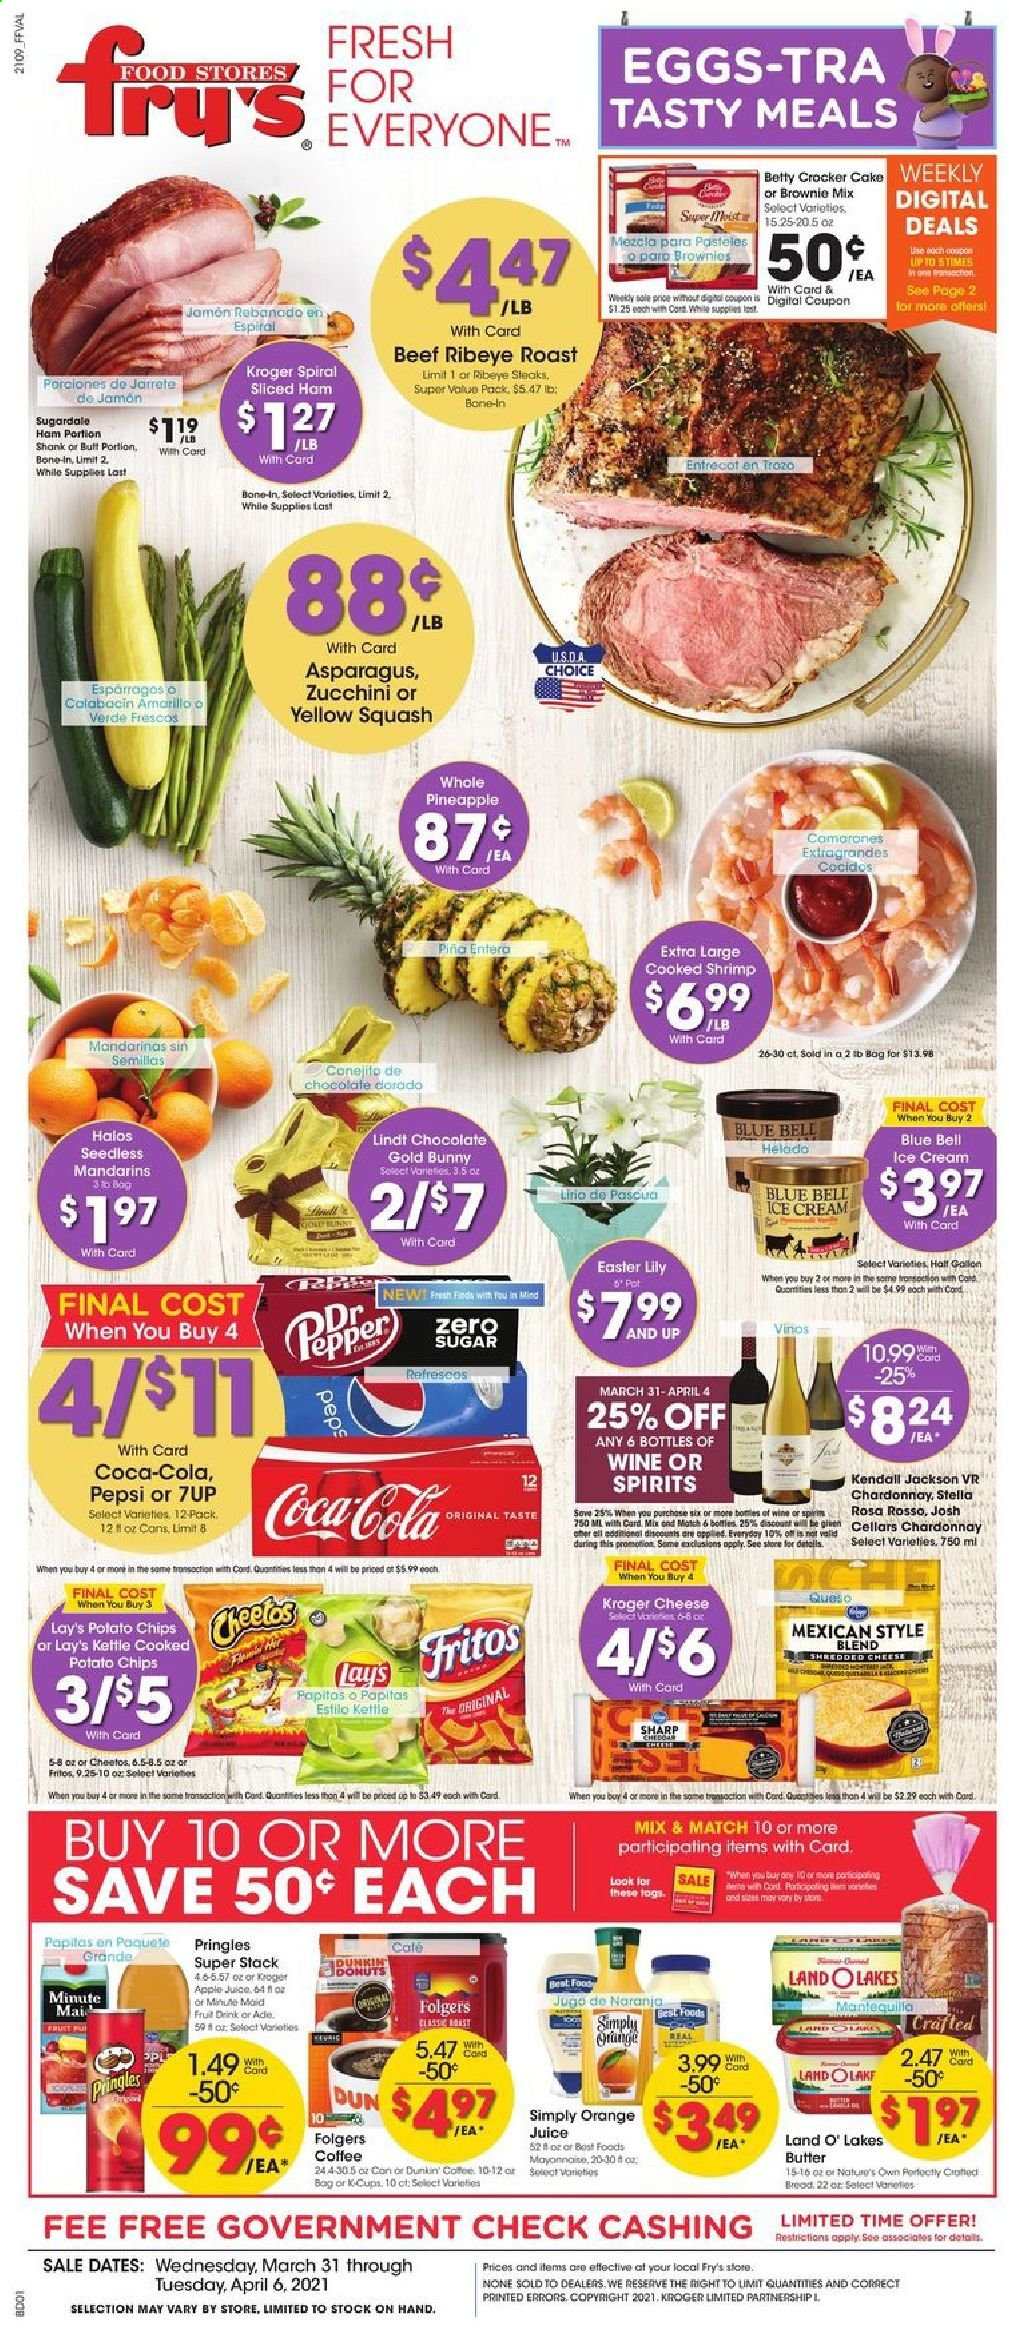 thumbnail - Fry’s Flyer - 03/31/2021 - 04/06/2021 - Sales products - Apple, brownie mix, cake, donut, shrimps, ham, shredded cheese, eggs, butter, mayonnaise, ice cream, Blue Bell, zucchini, chocolate, Lindt, potato chips, Pringles, Cheetos, chips, Lay’s, mandarines, Fritos, apple juice, Coca-Cola, Pepsi, orange juice, juice, fruit drink, 7UP, coffee, Folgers, L'Or, Chardonnay, wine, beef meat, steak, ribeye steak, Sharp, asparagus, pineapple. Page 1.